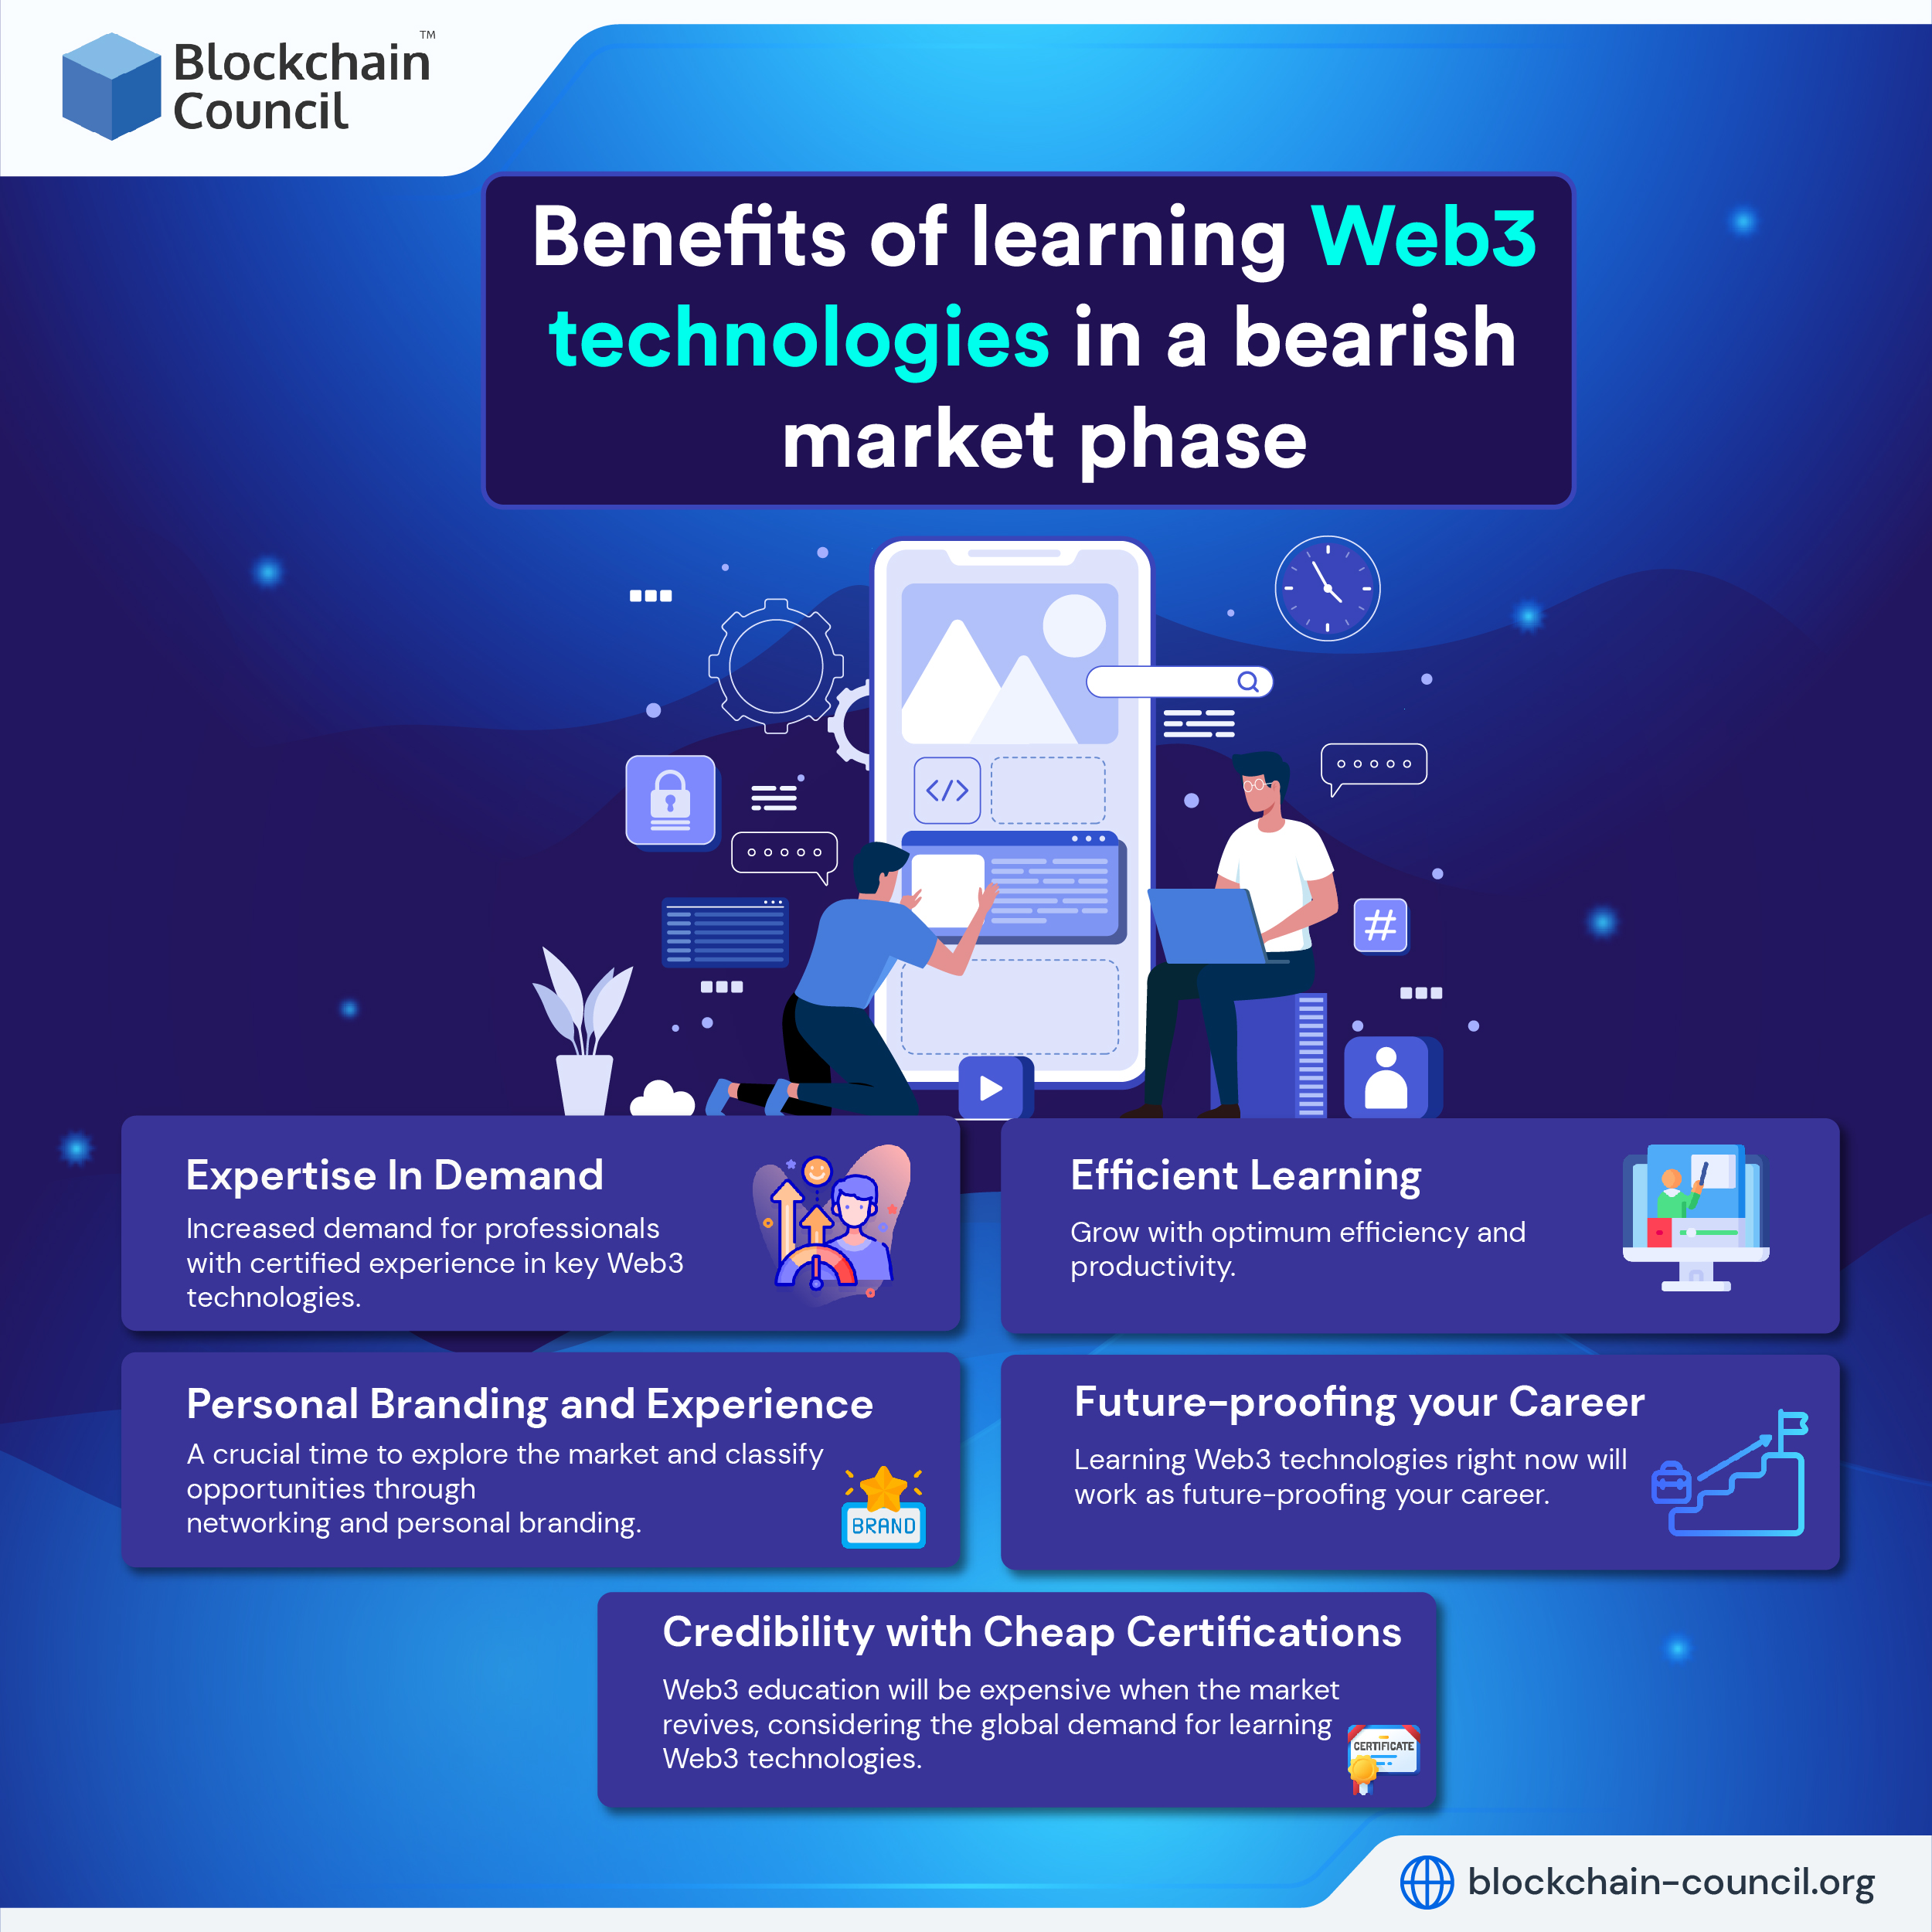 Benefits of learning Web3 technologies in a bearish market phase